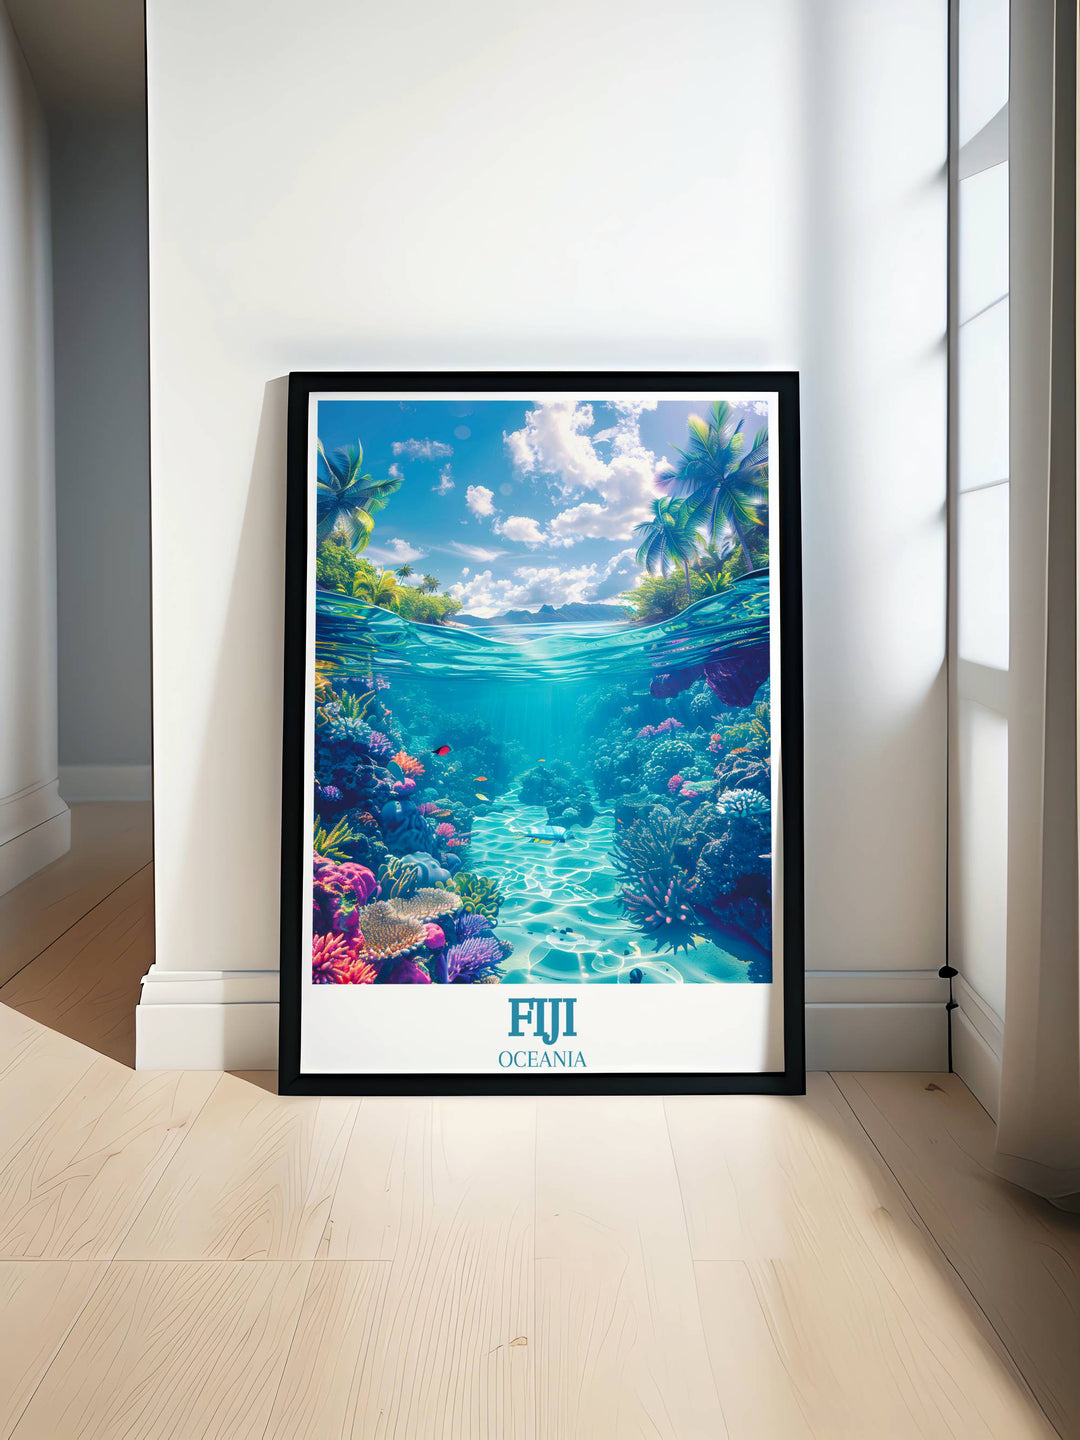 Fiji Oceania Travel Poster capturing the vivid underwater world of The Great Astrolabe Reef, perfect for adding a touch of adventure to any room.